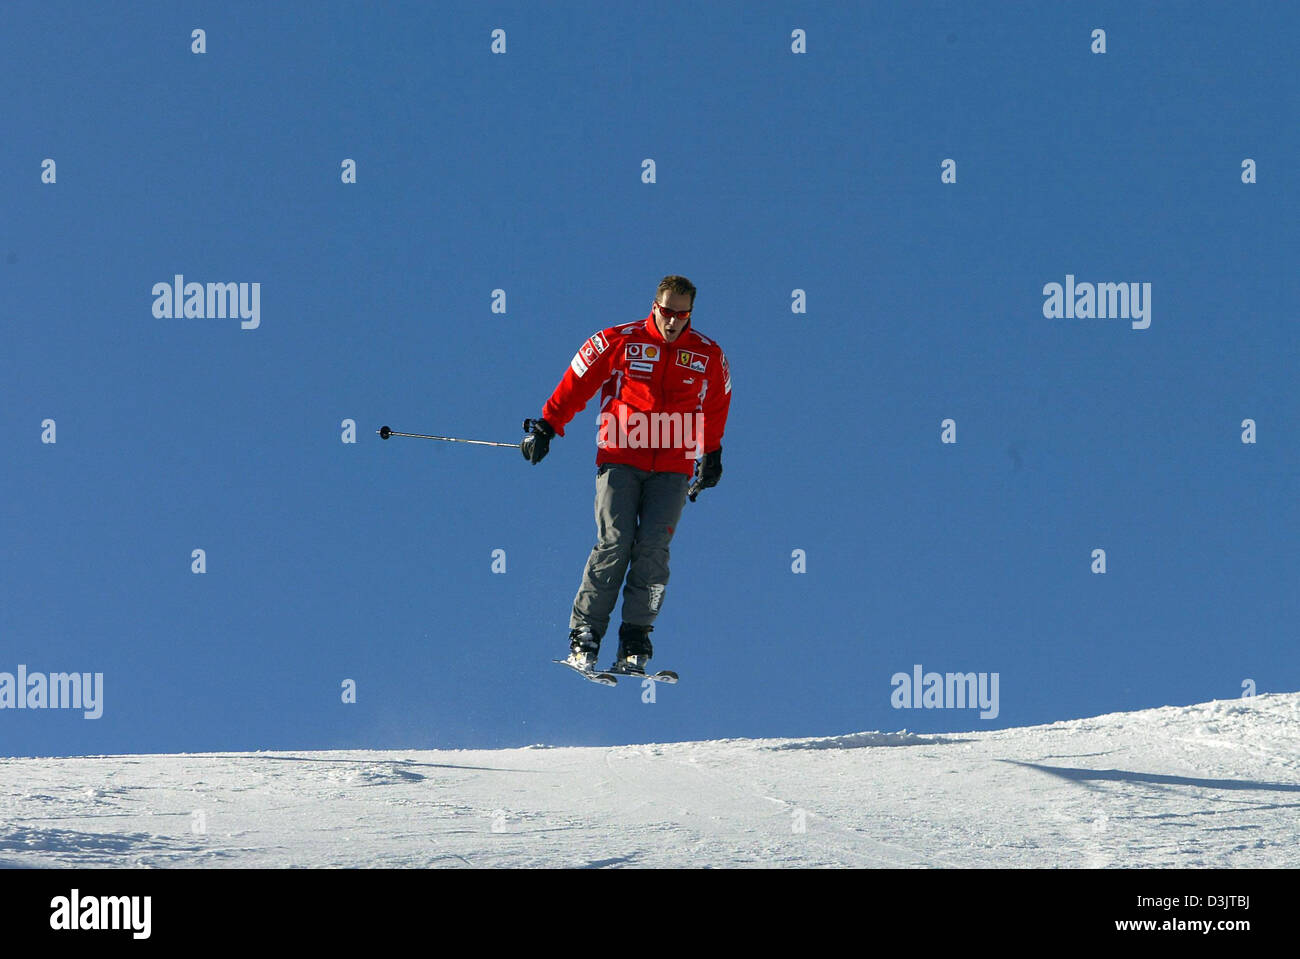 (dpa) - Seven time Formula 1 champion Michael Schumacher (team Ferrari) jumps as he skis down the slopes shortly after arriving in the ski resort of Madonna di Campiglio, Italy, 11 January 2005. The Ferrari team got together for its traditional ski vacation in the Italian Alps. (ITALY OUT) Stock Photo